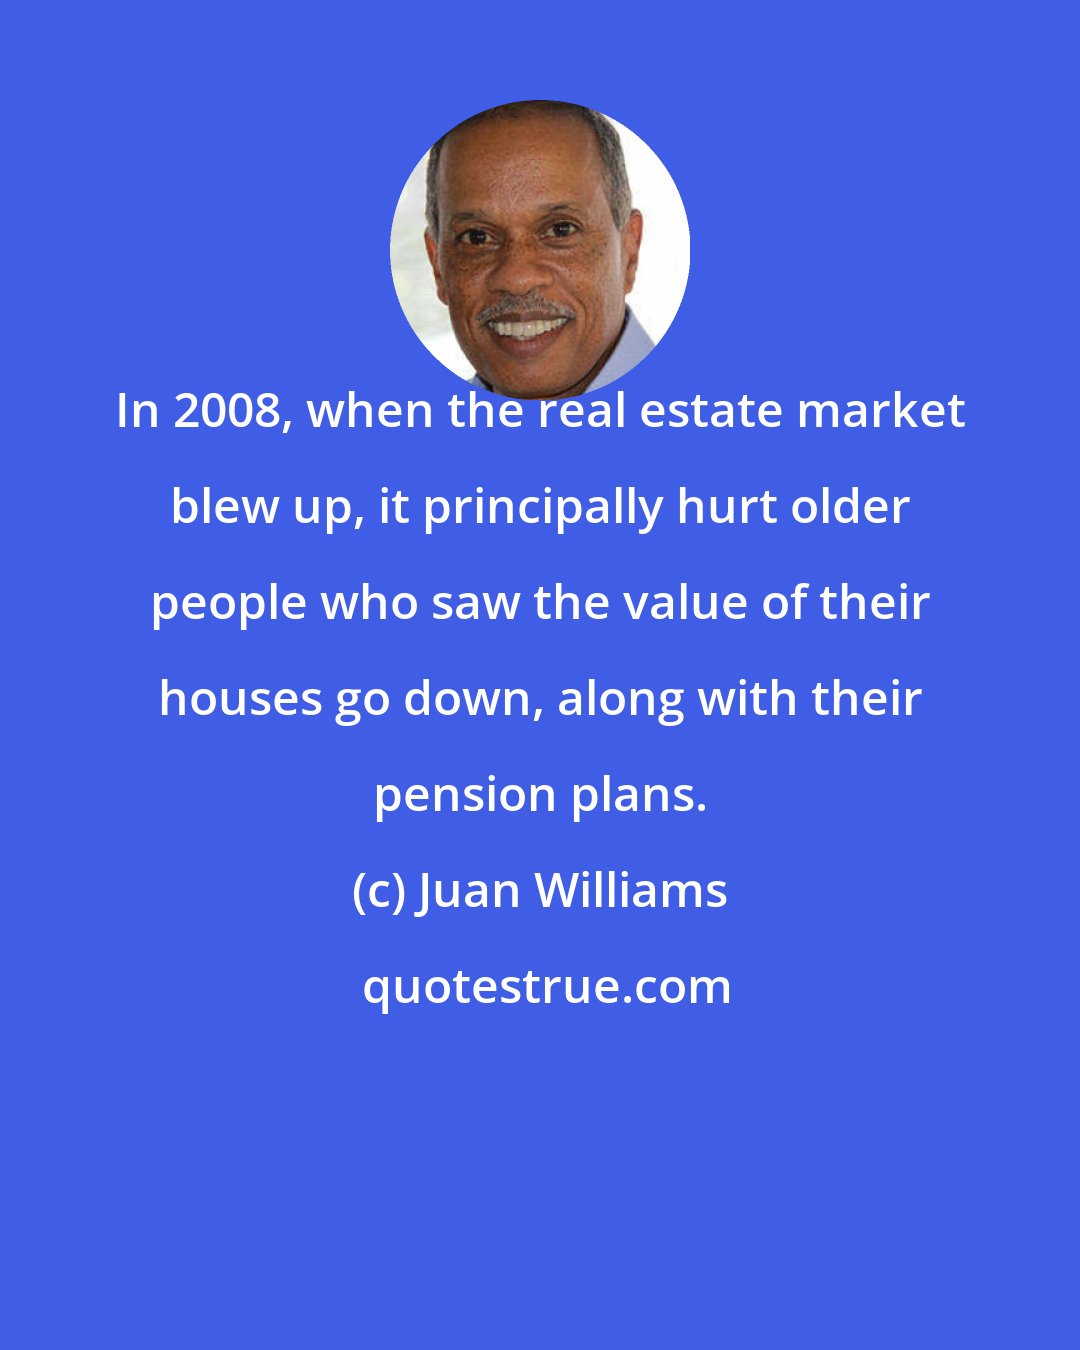 Juan Williams: In 2008, when the real estate market blew up, it principally hurt older people who saw the value of their houses go down, along with their pension plans.